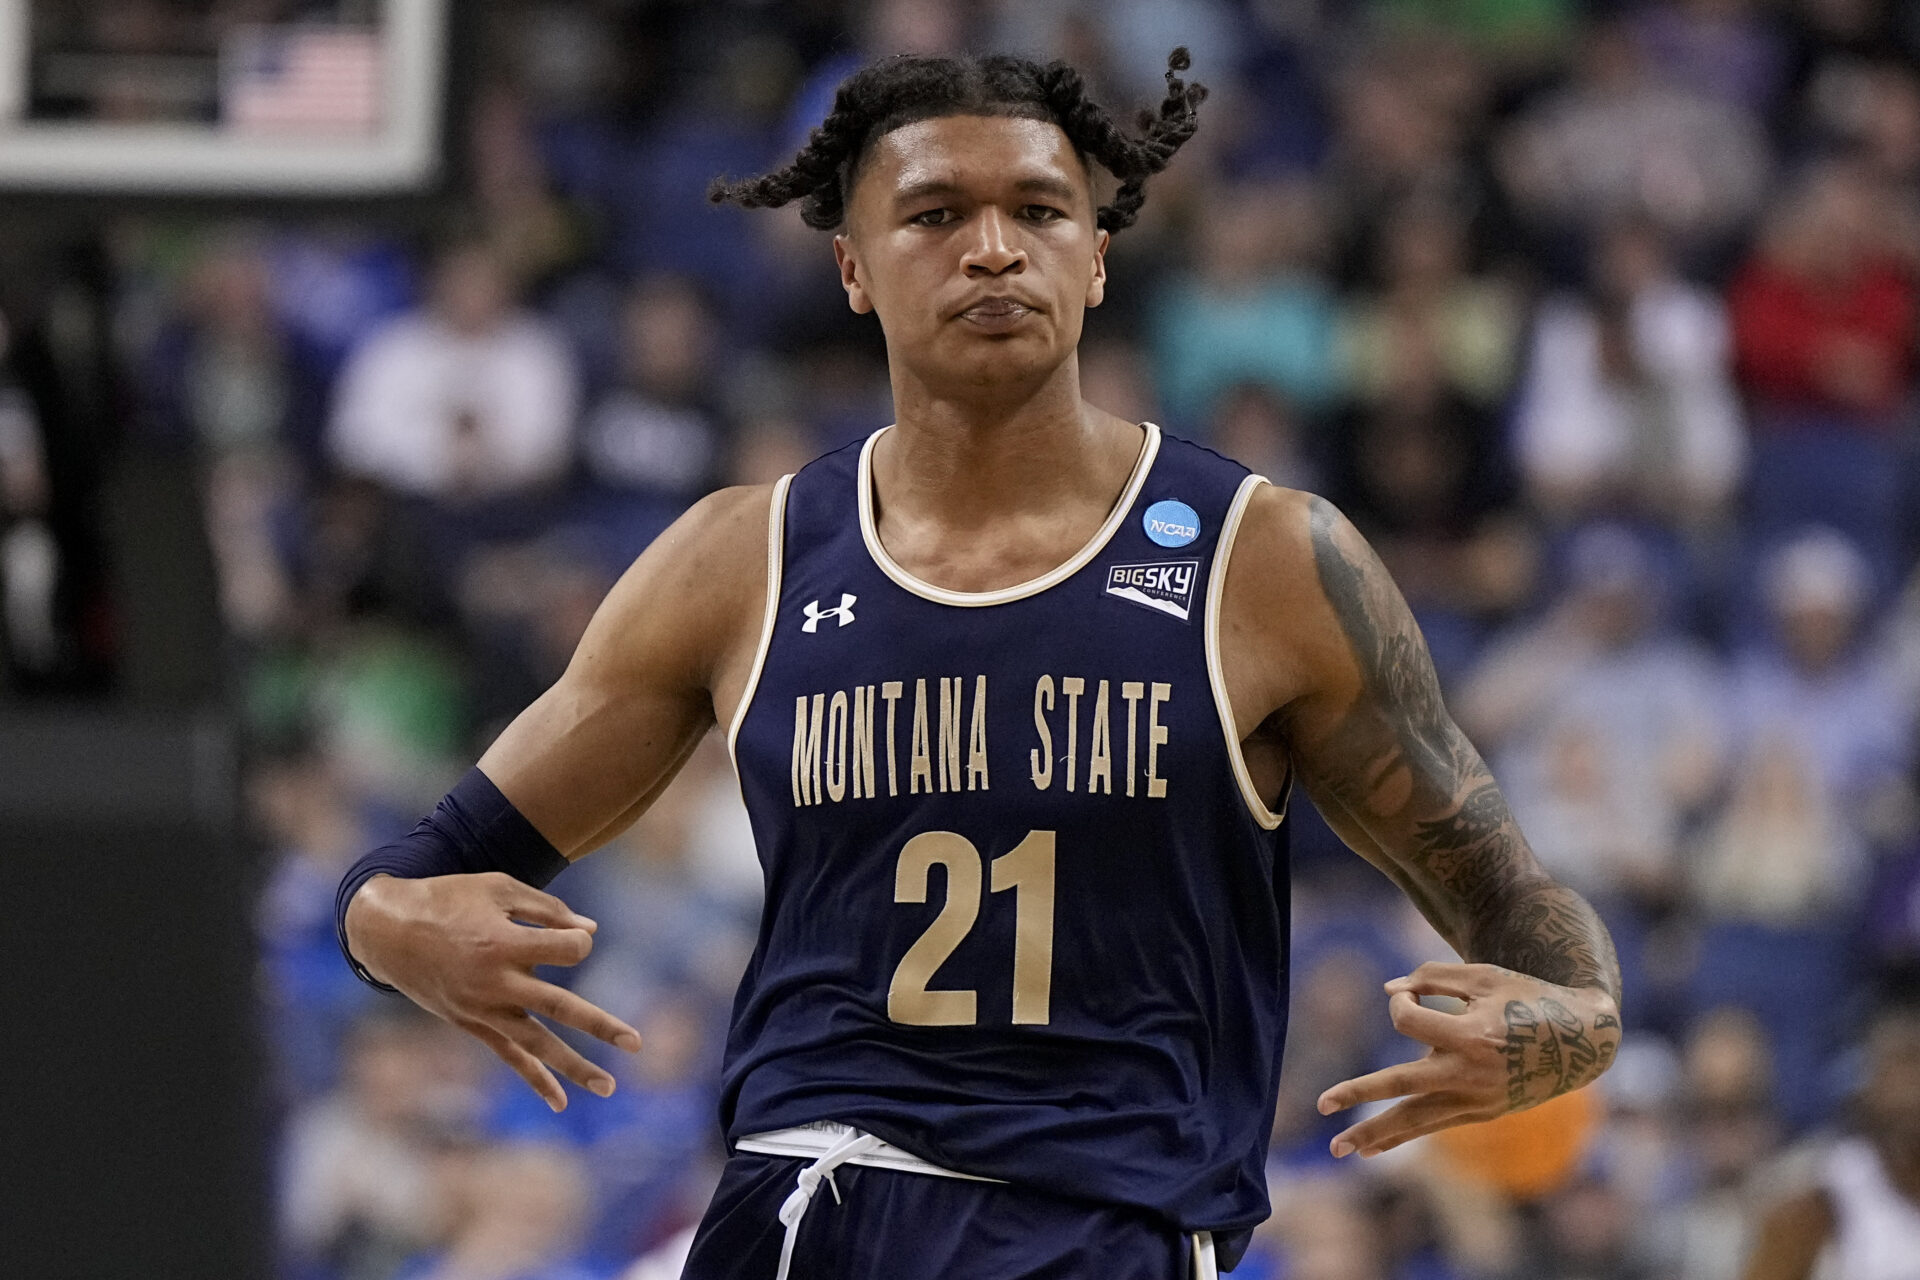 Morrisey Petitions NCAA For WVU Player Transfer